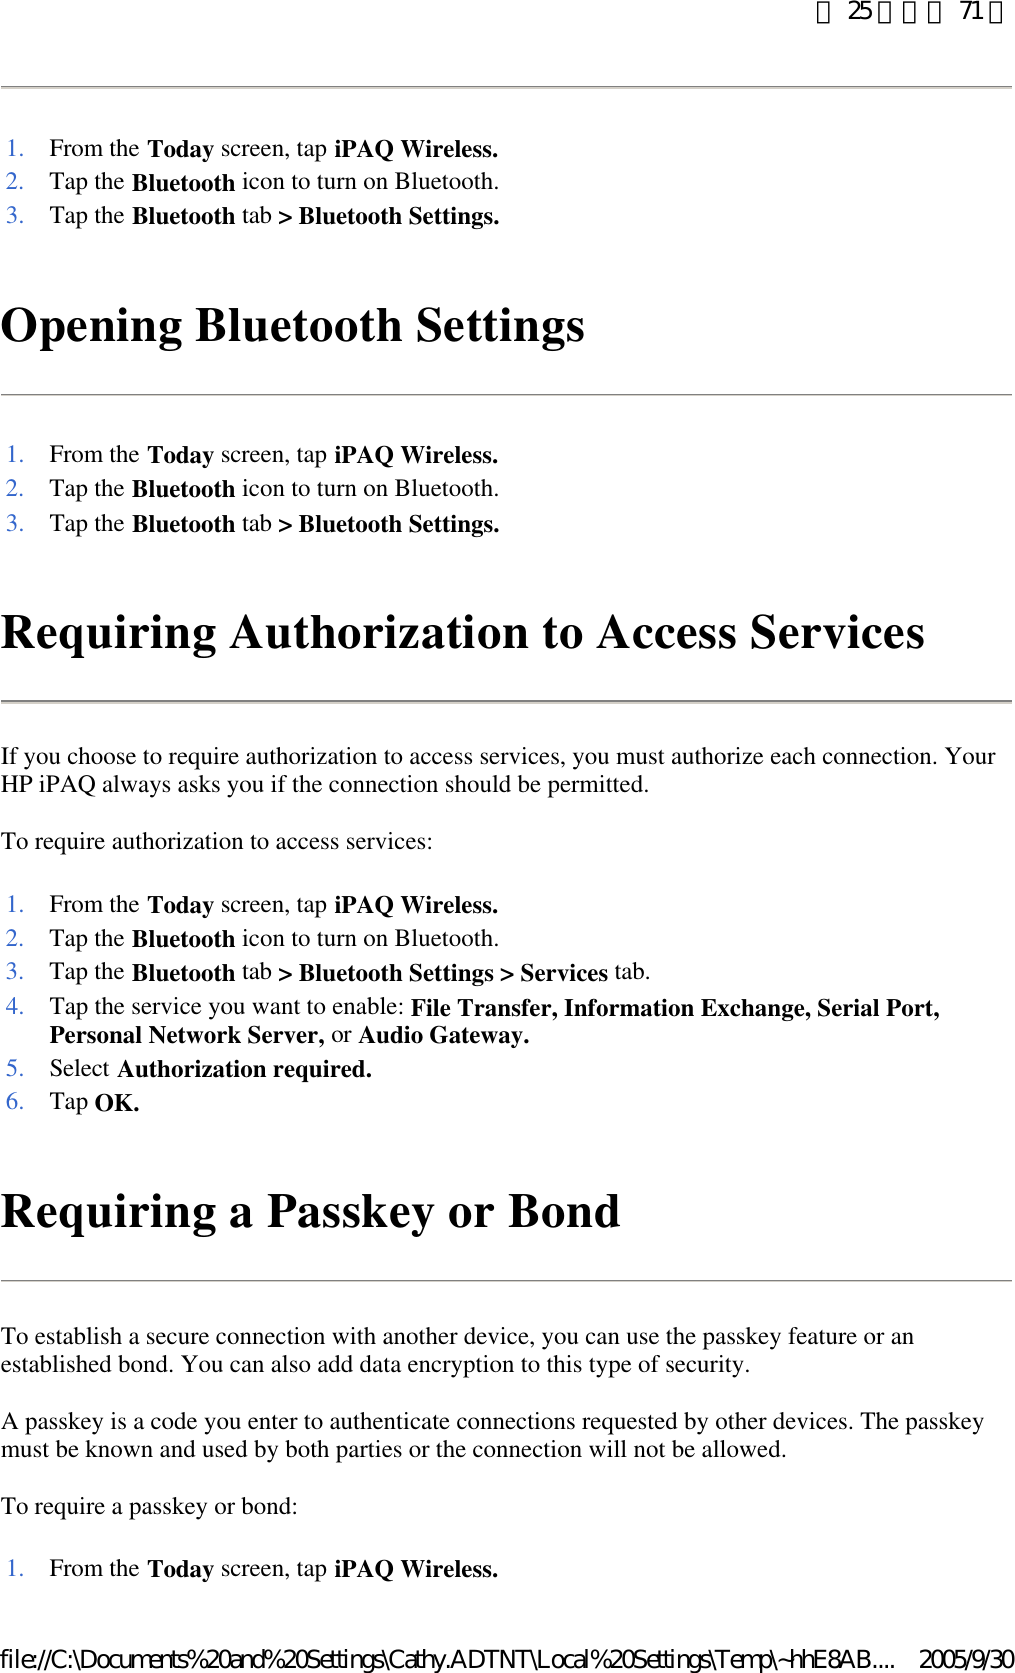 Opening Bluetooth Settings  Requiring Authorization to Access Services If you choose to require authorization to access services, you must authorize each connection. Your HP iPAQ always asks you if the connection should be permitted.  To require authorization to access services: Requiring a Passkey or Bond To establish a secure connection with another device, you can use the passkey feature or an established bond. You can also add data encryption to this type of security.  A passkey is a code you enter to authenticate connections requested by other devices. The passkey must be known and used by both parties or the connection will not be allowed.  To require a passkey or bond: 1. From the Today screen, tap iPAQ Wireless.2. Tap the Bluetooth icon to turn on Bluetooth. 3. Tap the Bluetooth tab &gt; Bluetooth Settings.1. From the Today screen, tap iPAQ Wireless.2. Tap the Bluetooth icon to turn on Bluetooth. 3. Tap the Bluetooth tab &gt; Bluetooth Settings.1. From the Today screen, tap iPAQ Wireless.2. Tap the Bluetooth icon to turn on Bluetooth. 3. Tap the Bluetooth tab &gt; Bluetooth Settings &gt; Services tab. 4. Tap the service you want to enable: File Transfer, Information Exchange, Serial Port, Personal Network Server, or Audio Gateway.5. Select Authorization required.6. Tap OK.1. From the Today screen, tap iPAQ Wireless.第 25 頁，共 71 頁2005/9/30file://C:\Documents%20and%20Settings\Cathy.ADTNT\Local%20Settings\Temp\~hhE8AB....